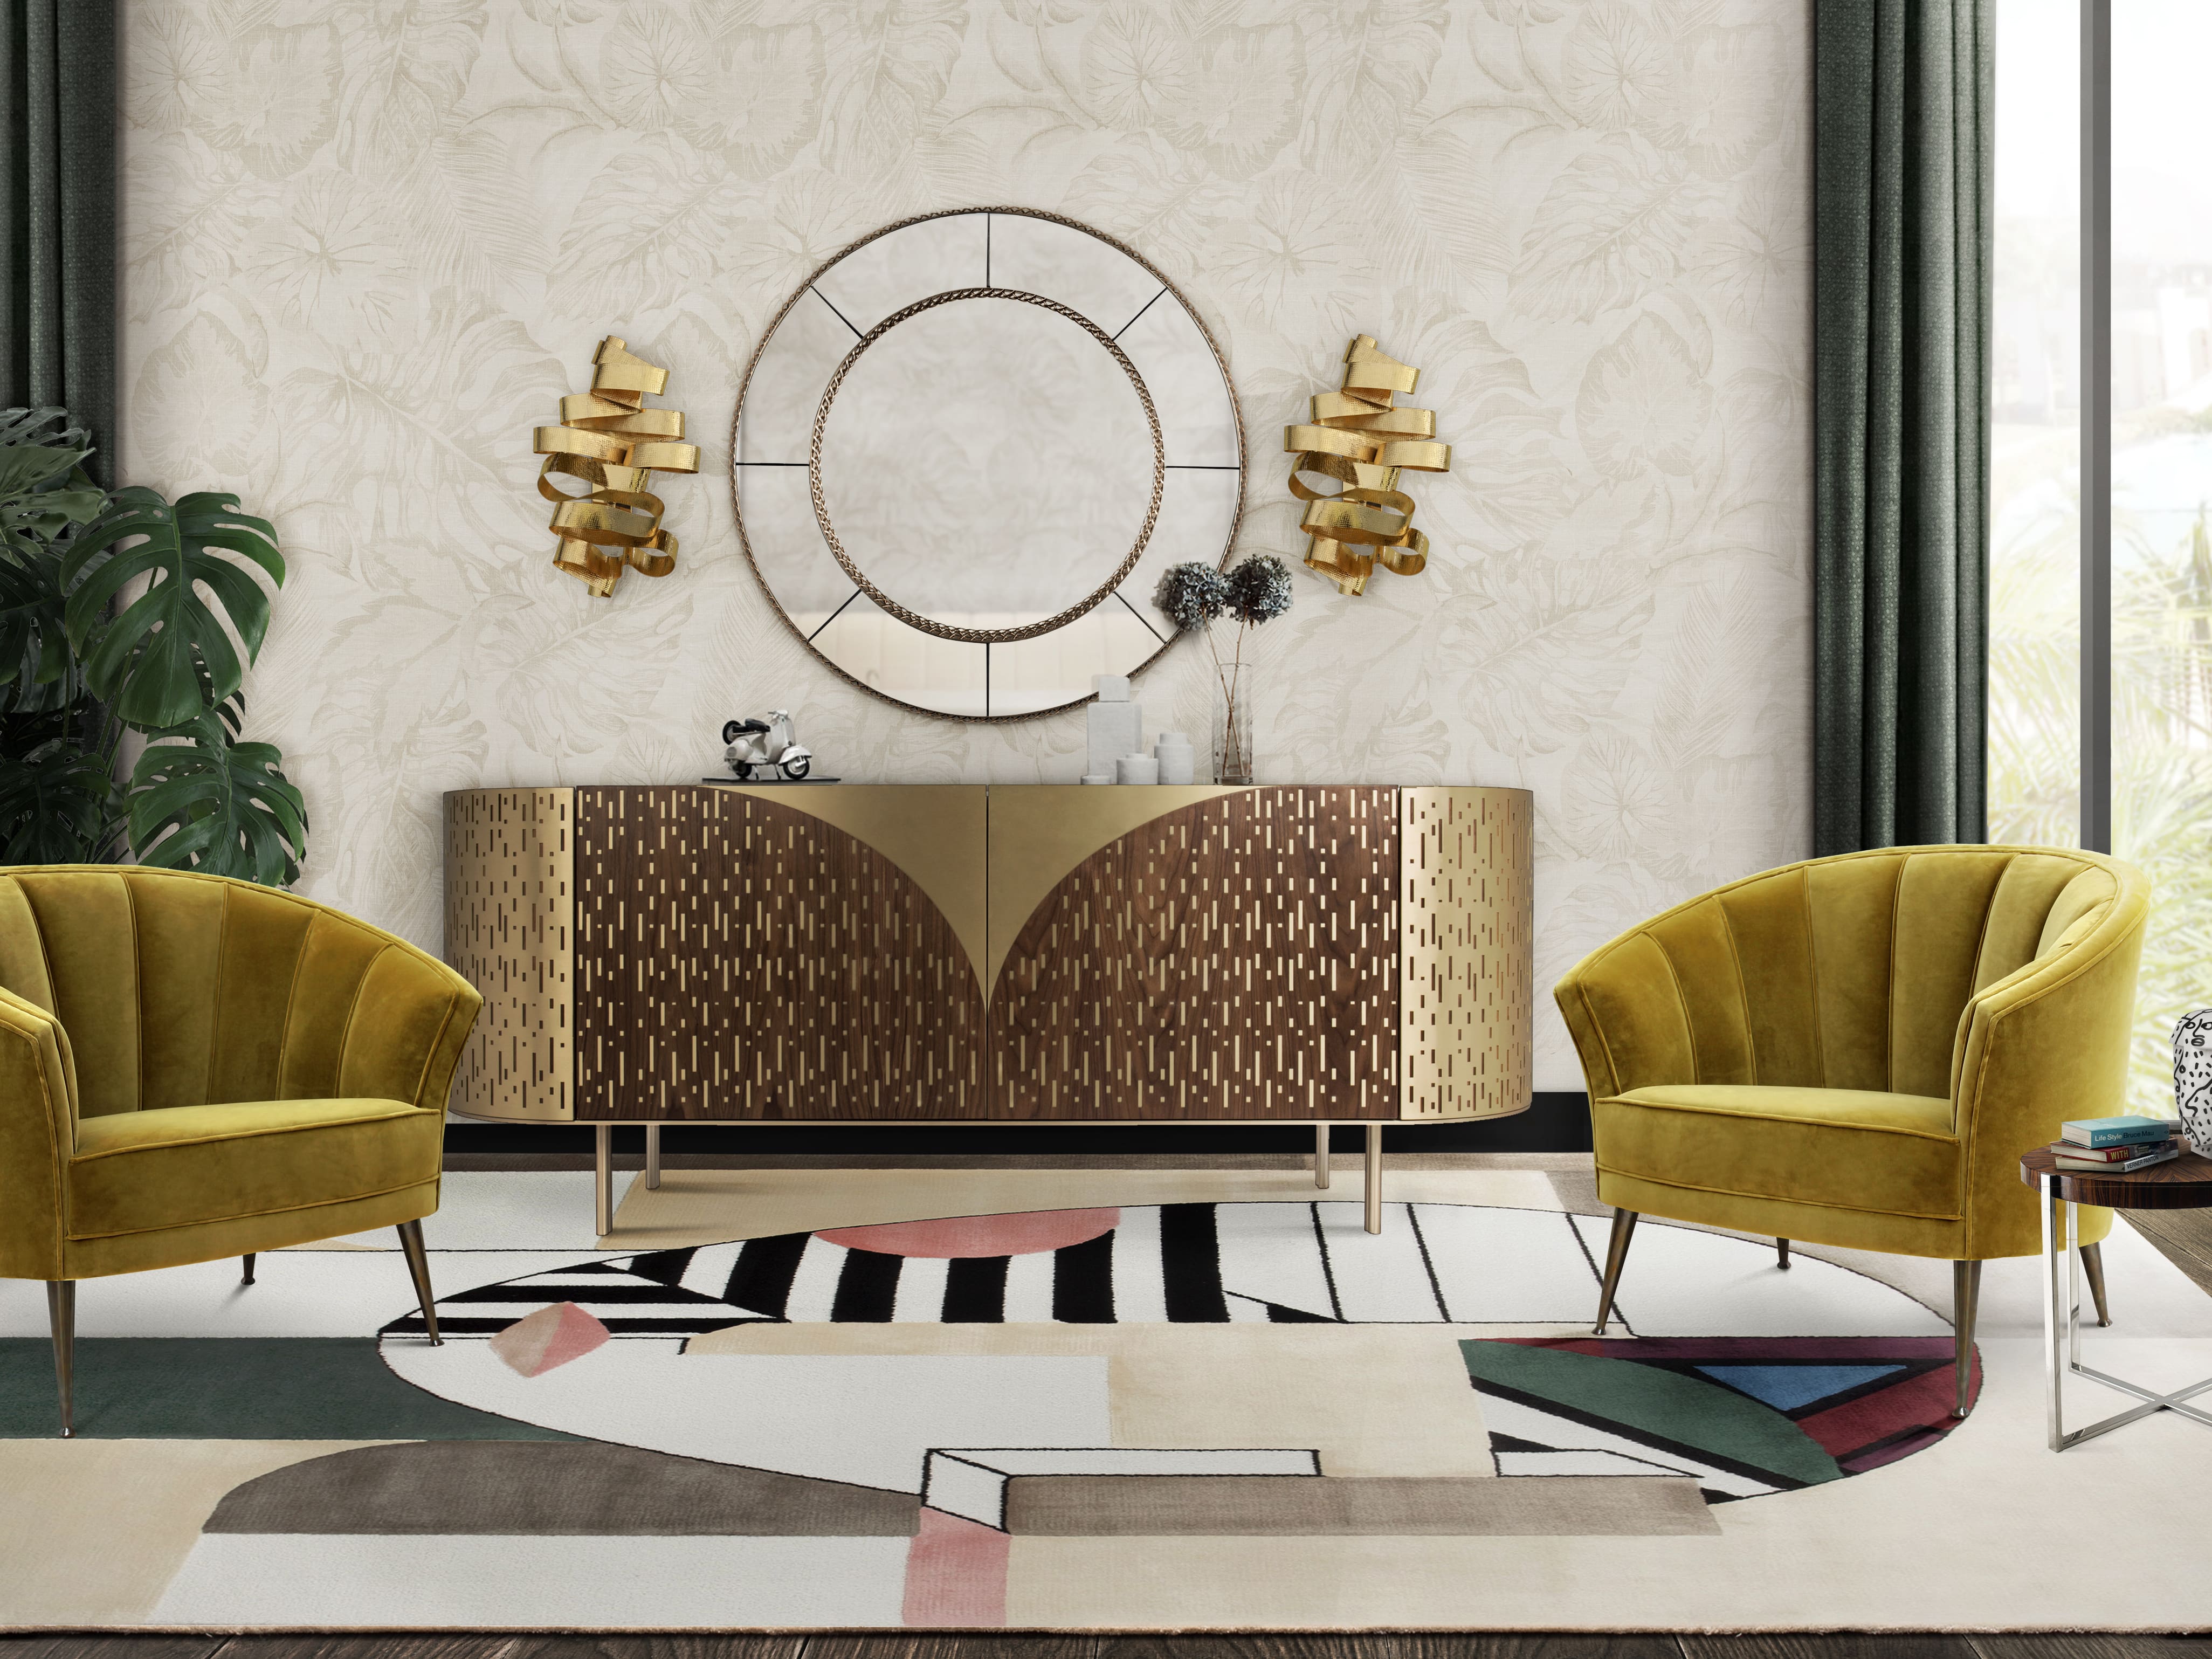 Living Room Decor With Caracter And Individuality - Home'Society